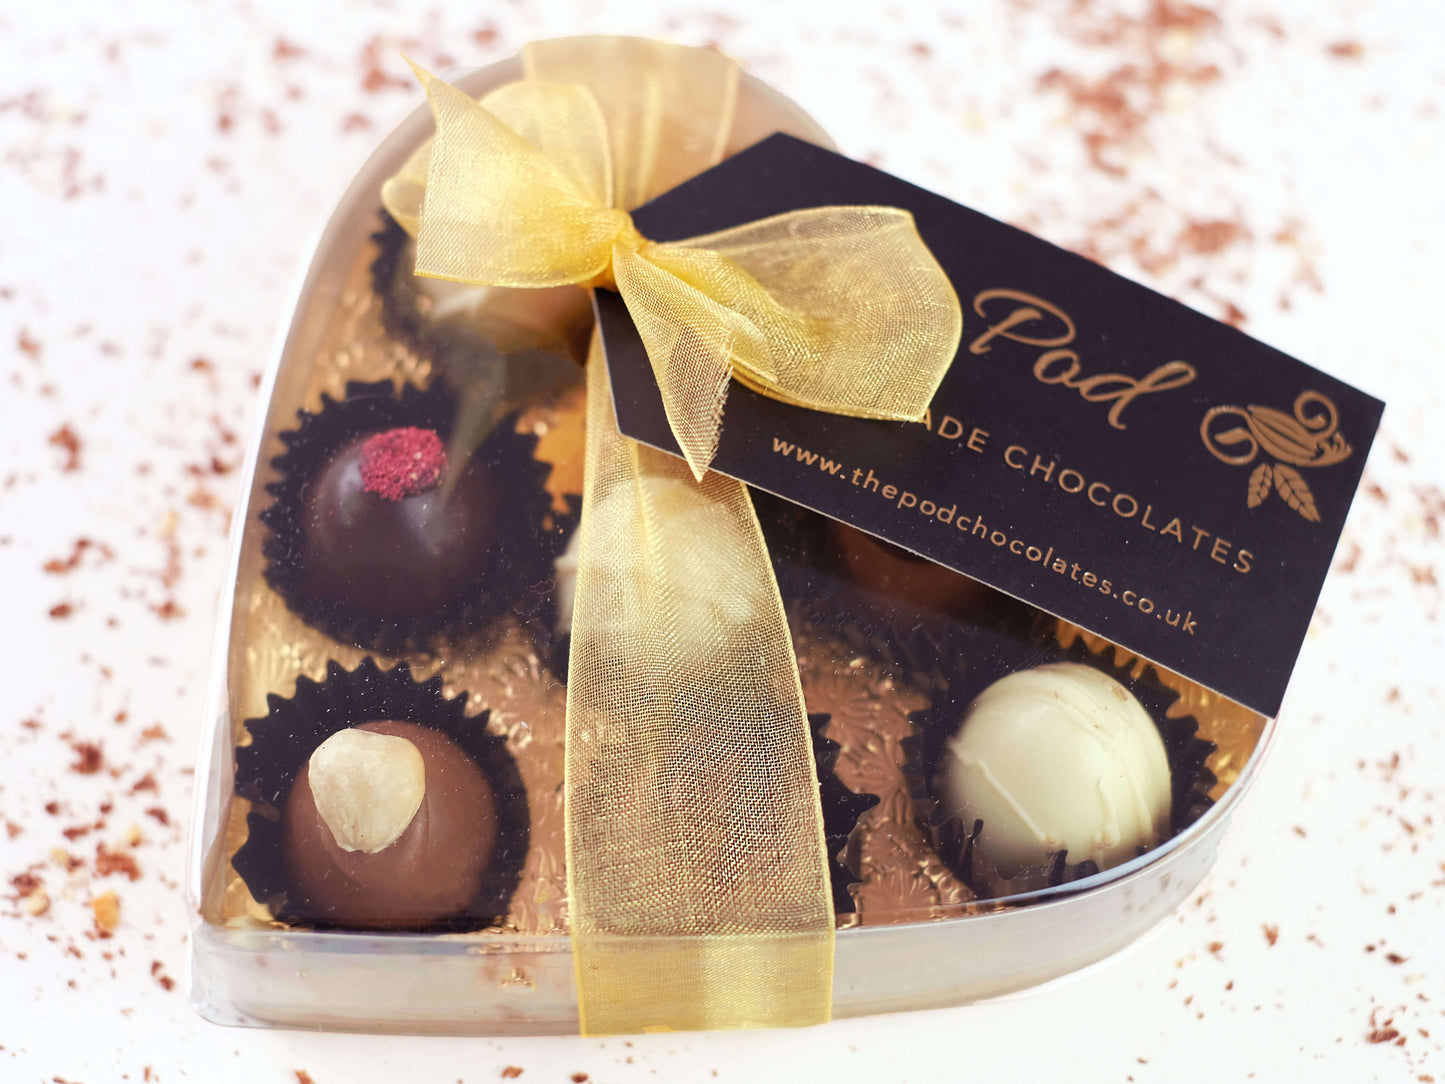 image shows a heart shaped gift box of 8 sugar free chocolates tied with a gold box